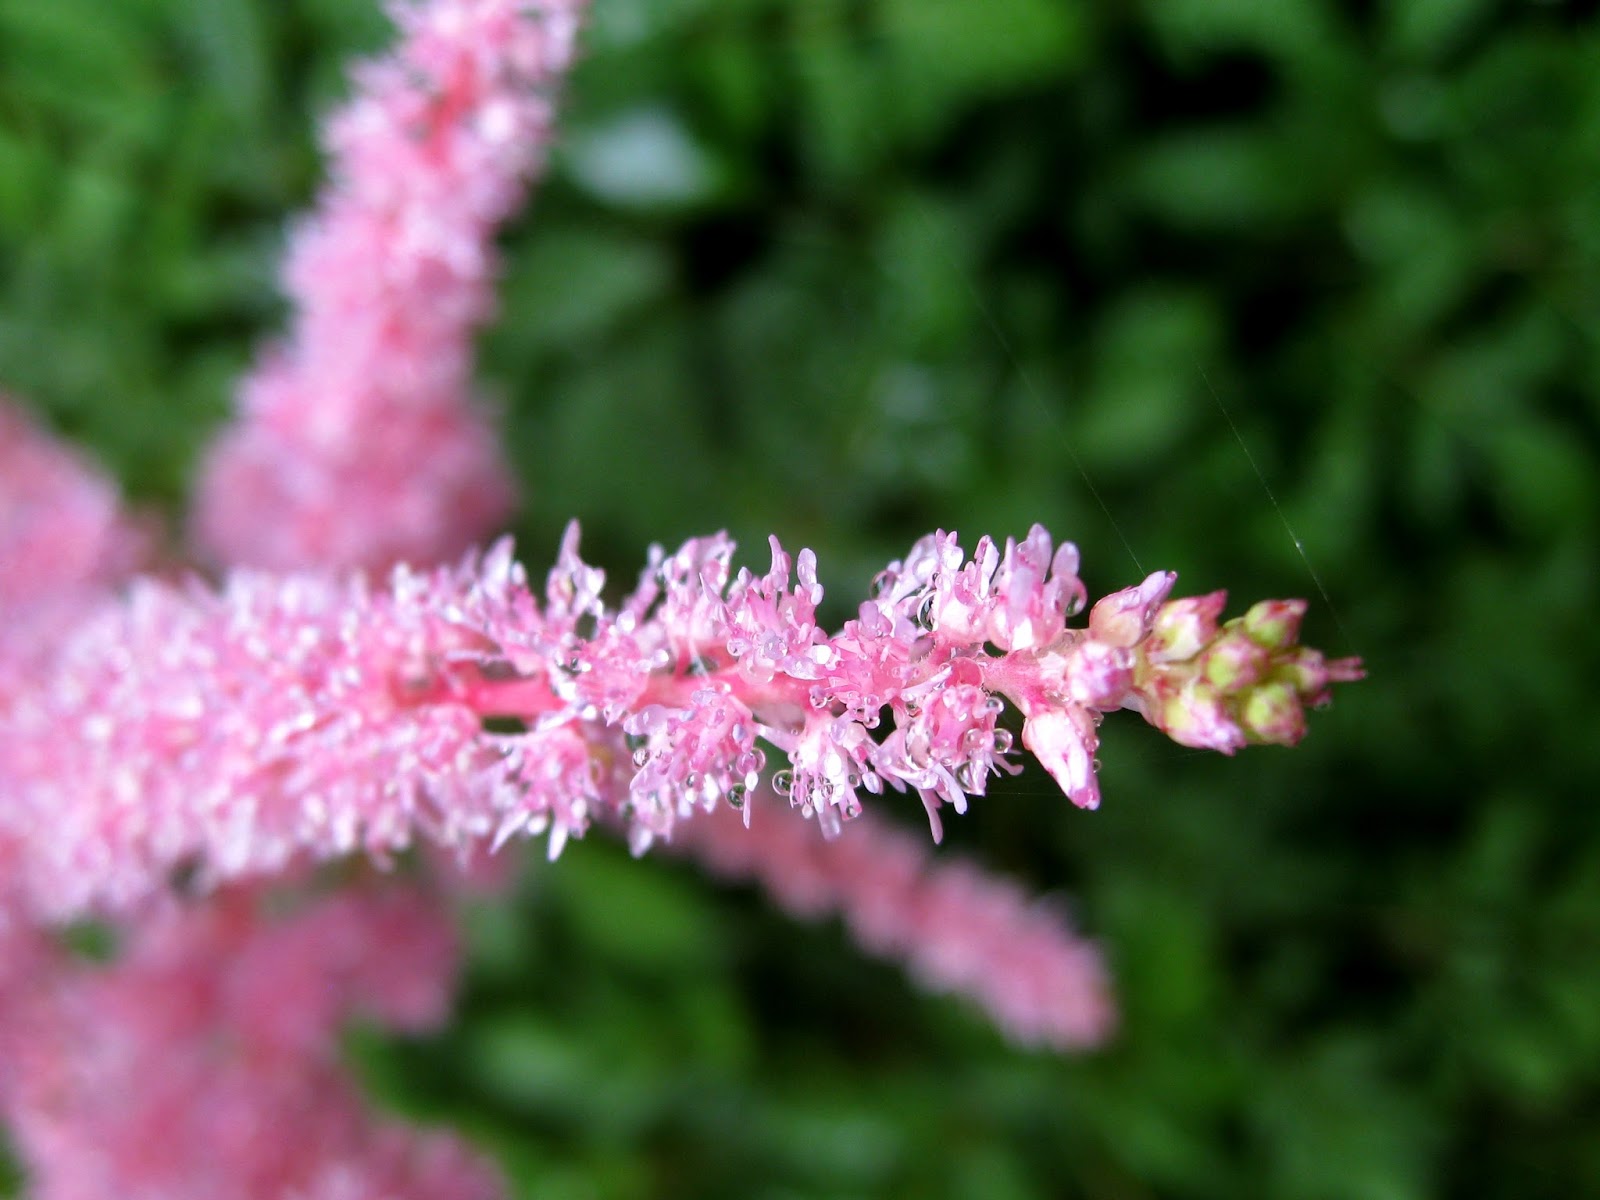 Image Astilbe_with_dew_2.jpg free for use with attribution